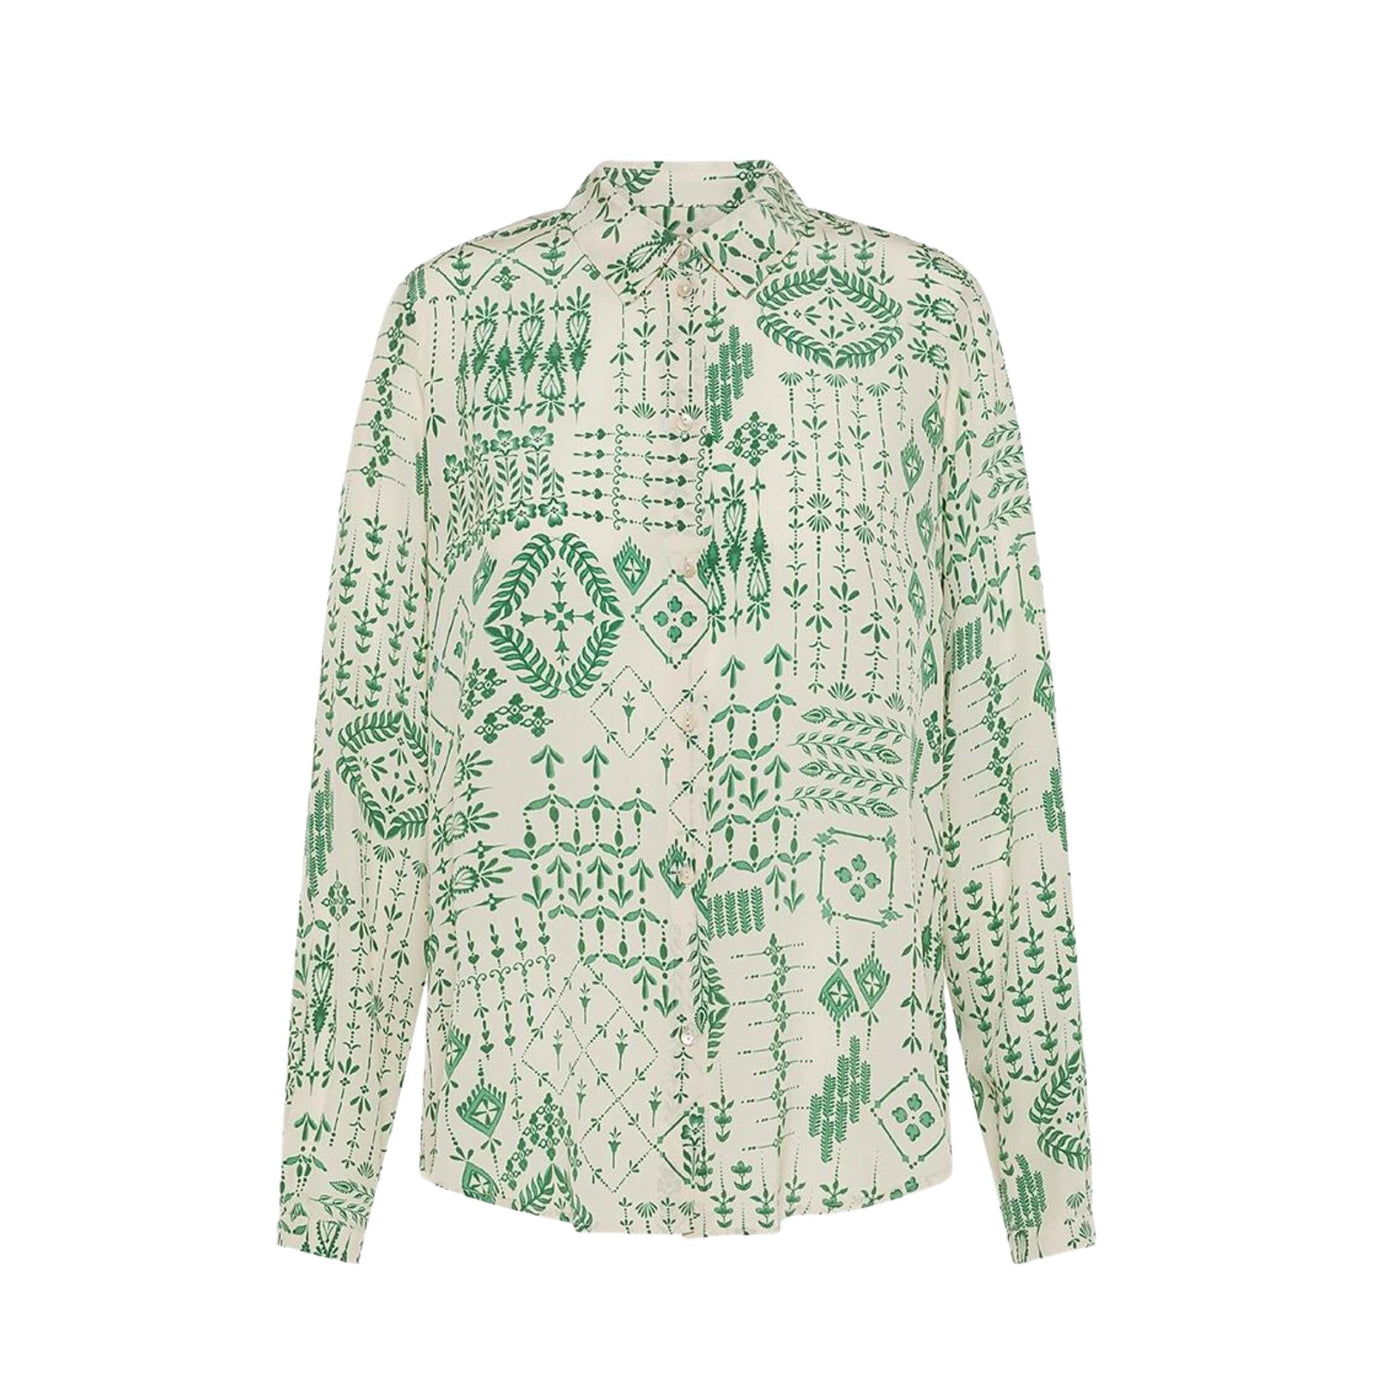 Women's shirt with all-over pattern